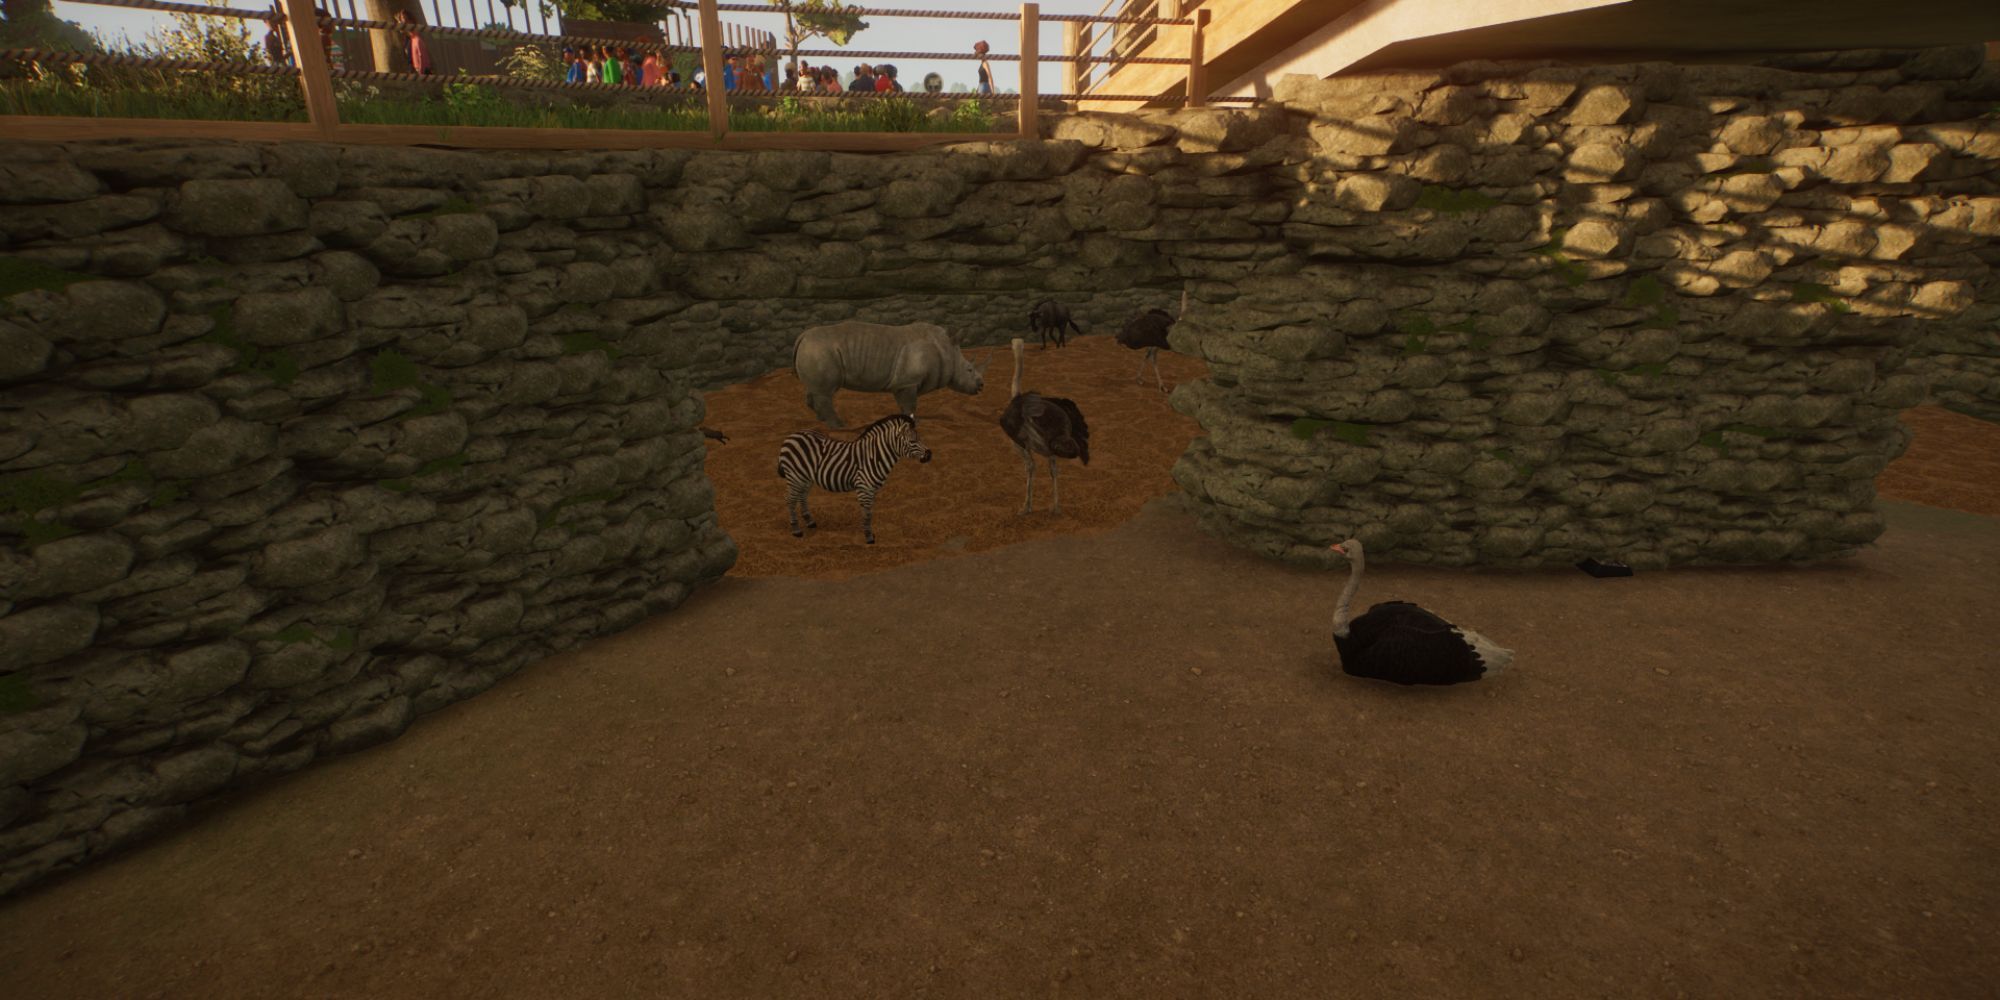 Planet Zoo animals hiding under shelter